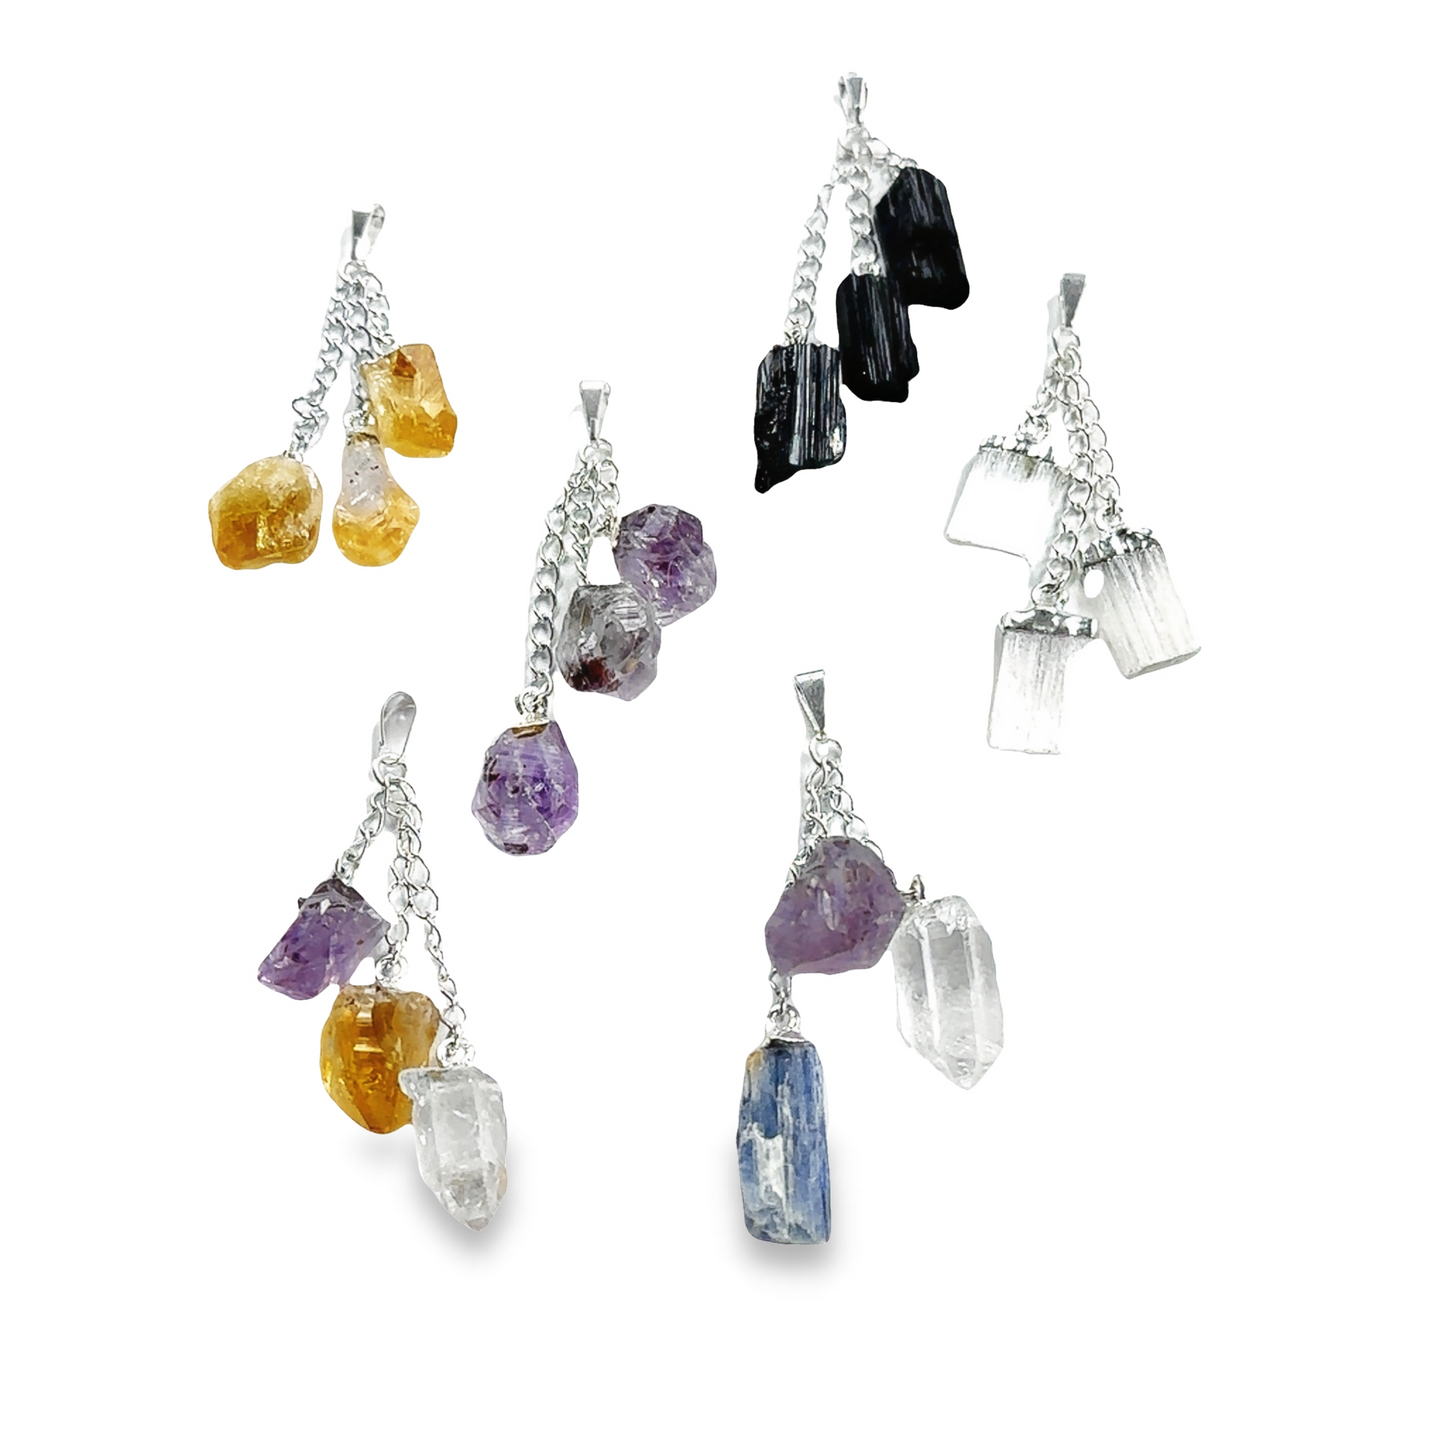 A collection of Super Silver boho necklaces featuring stunning Triple Crystal Pendants in various colors.